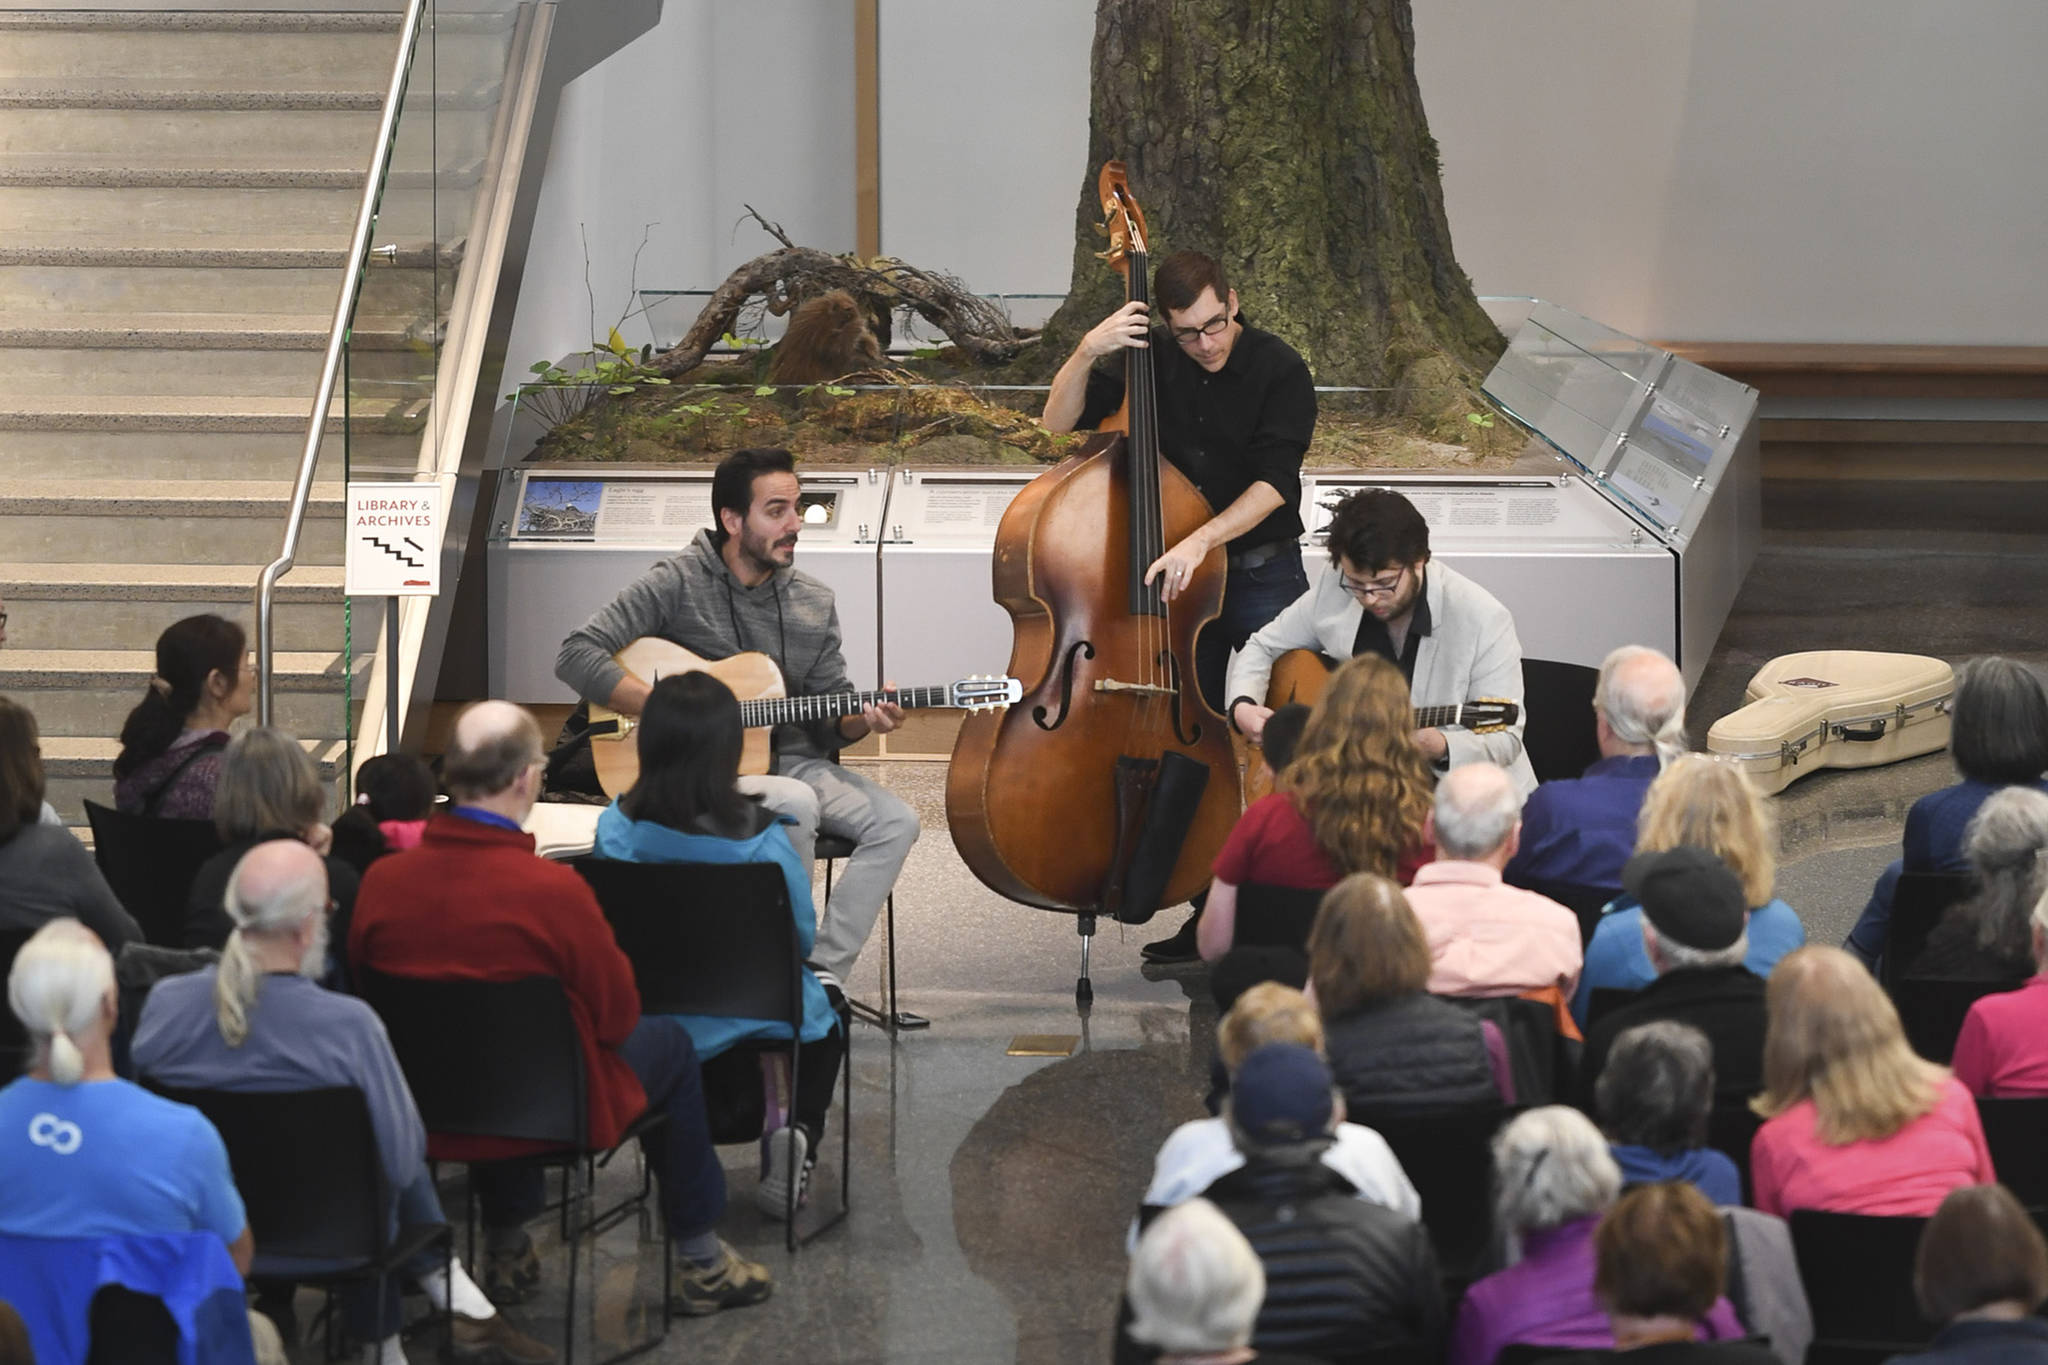 Members of the Gonzalo Bergara Trio perform in the atrium of the Andrew P. Kashevaroff Building as part of Juneau Jazz & Classics on Friday, May 10, 2019. The music festival continues through May 18. (Michael Penn | Juneau Empire)